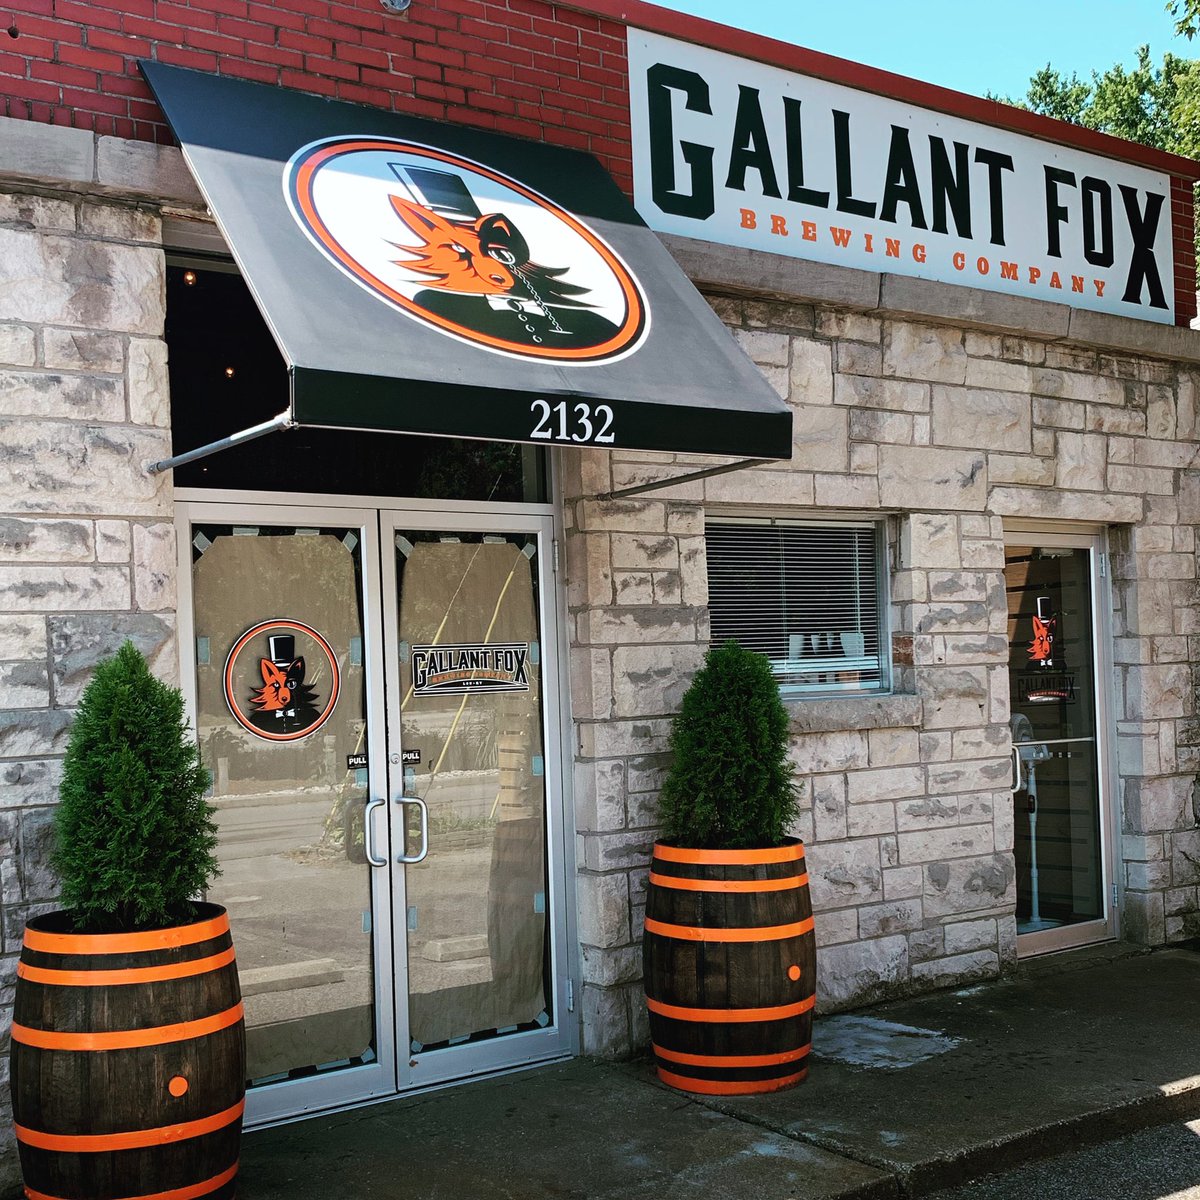 We couldn’t stay hidden forever... coming down the stretch toward the finish line.  Signs are up! 

#nanobrewery #louisville #kentucky #brewery #signage #sign #fox #foxy #foxyaf #craftbeer #beer #drinkcraft #seaktheseal